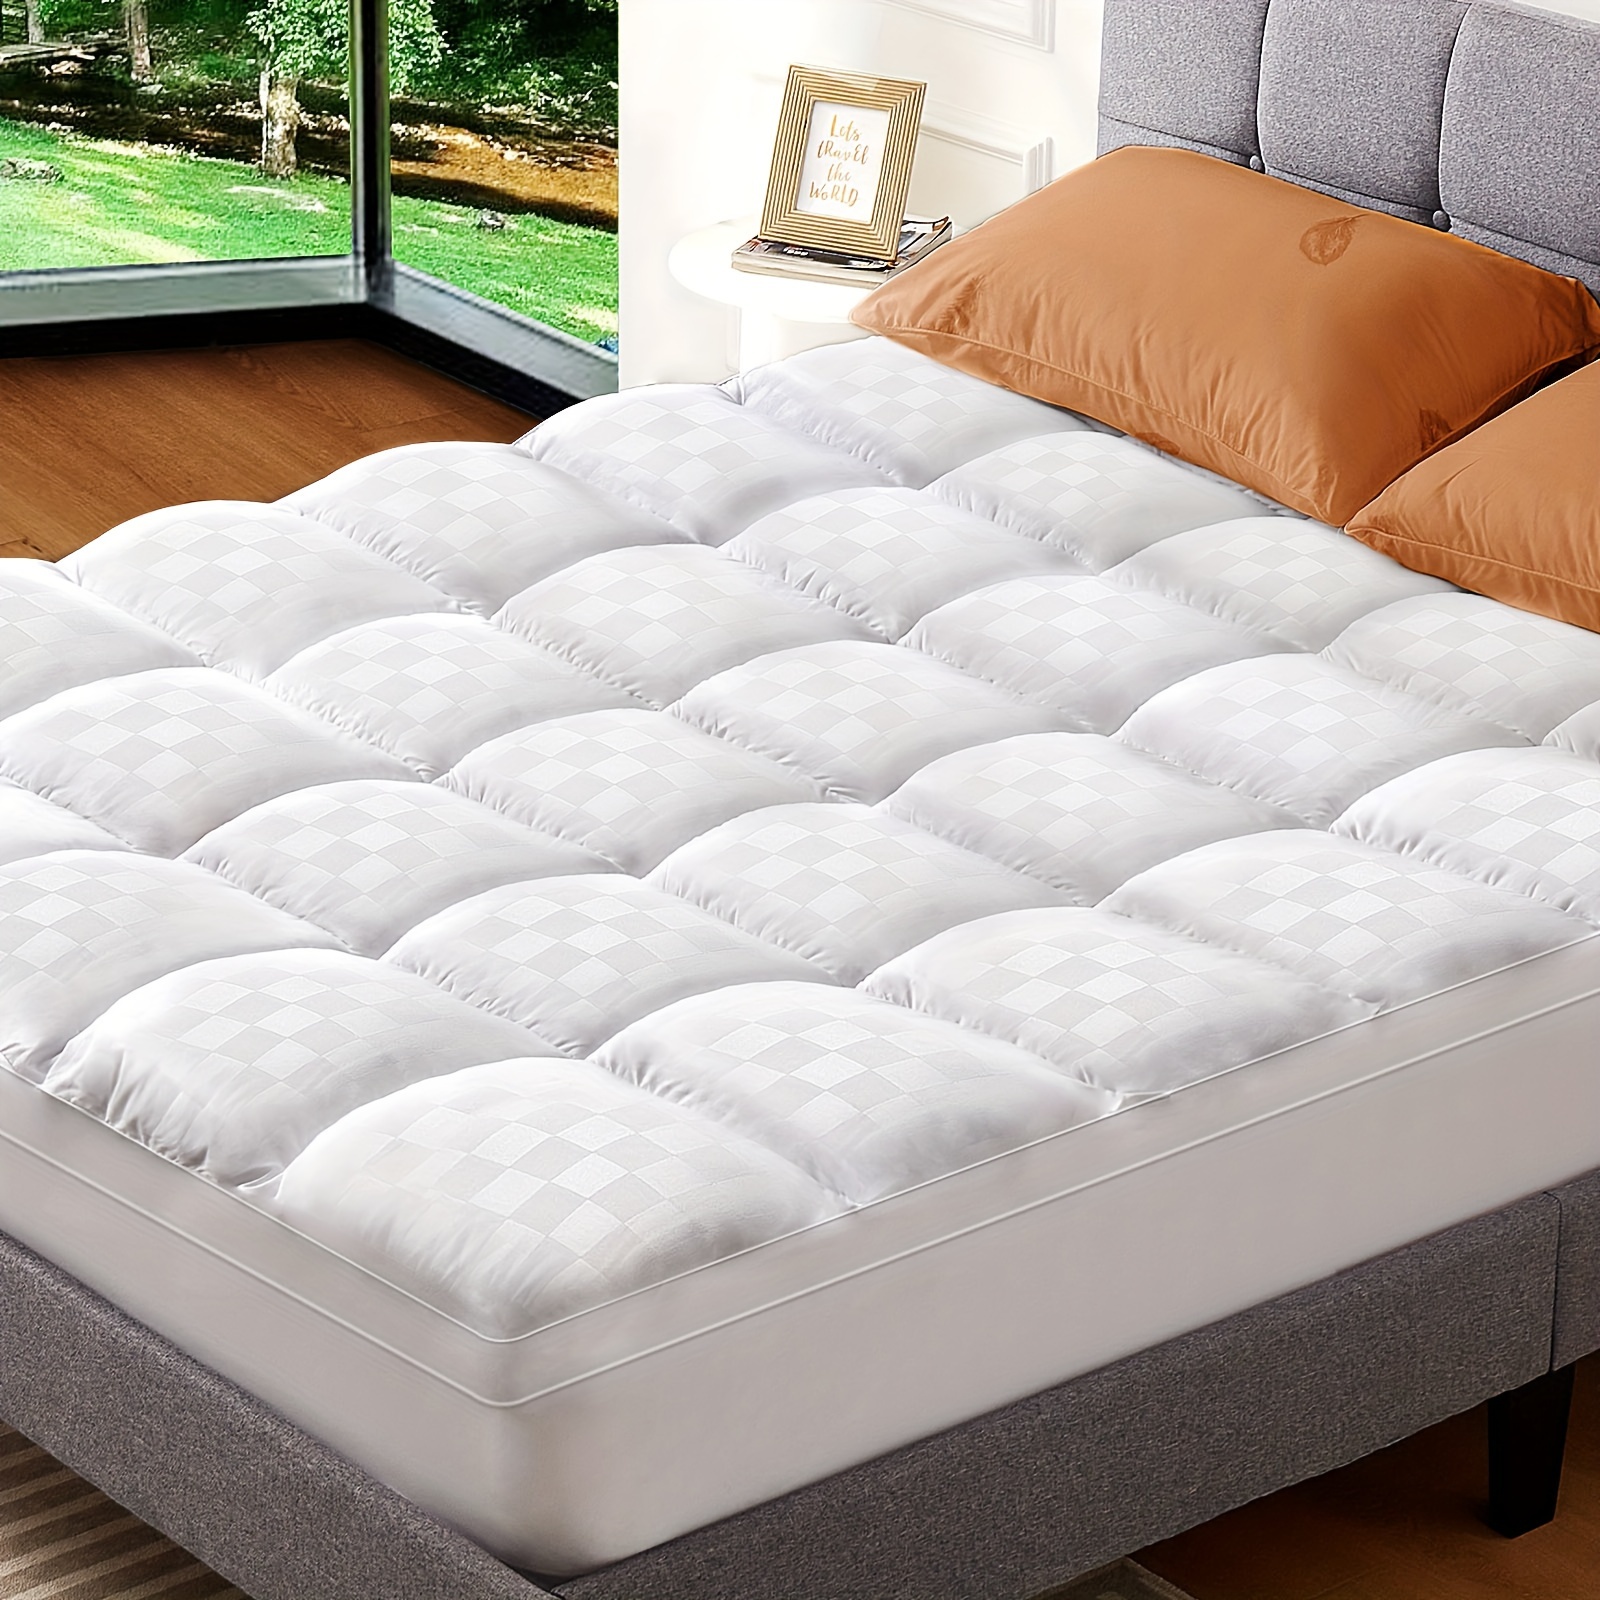 

800gsm Mattress Topper, Extra Thick Pillowtop, Cooling And Plush Mattress Pad Cover 400tc Cotton With 8-21 Inch Deep Pocket 3d Snow Down Alternative Fill